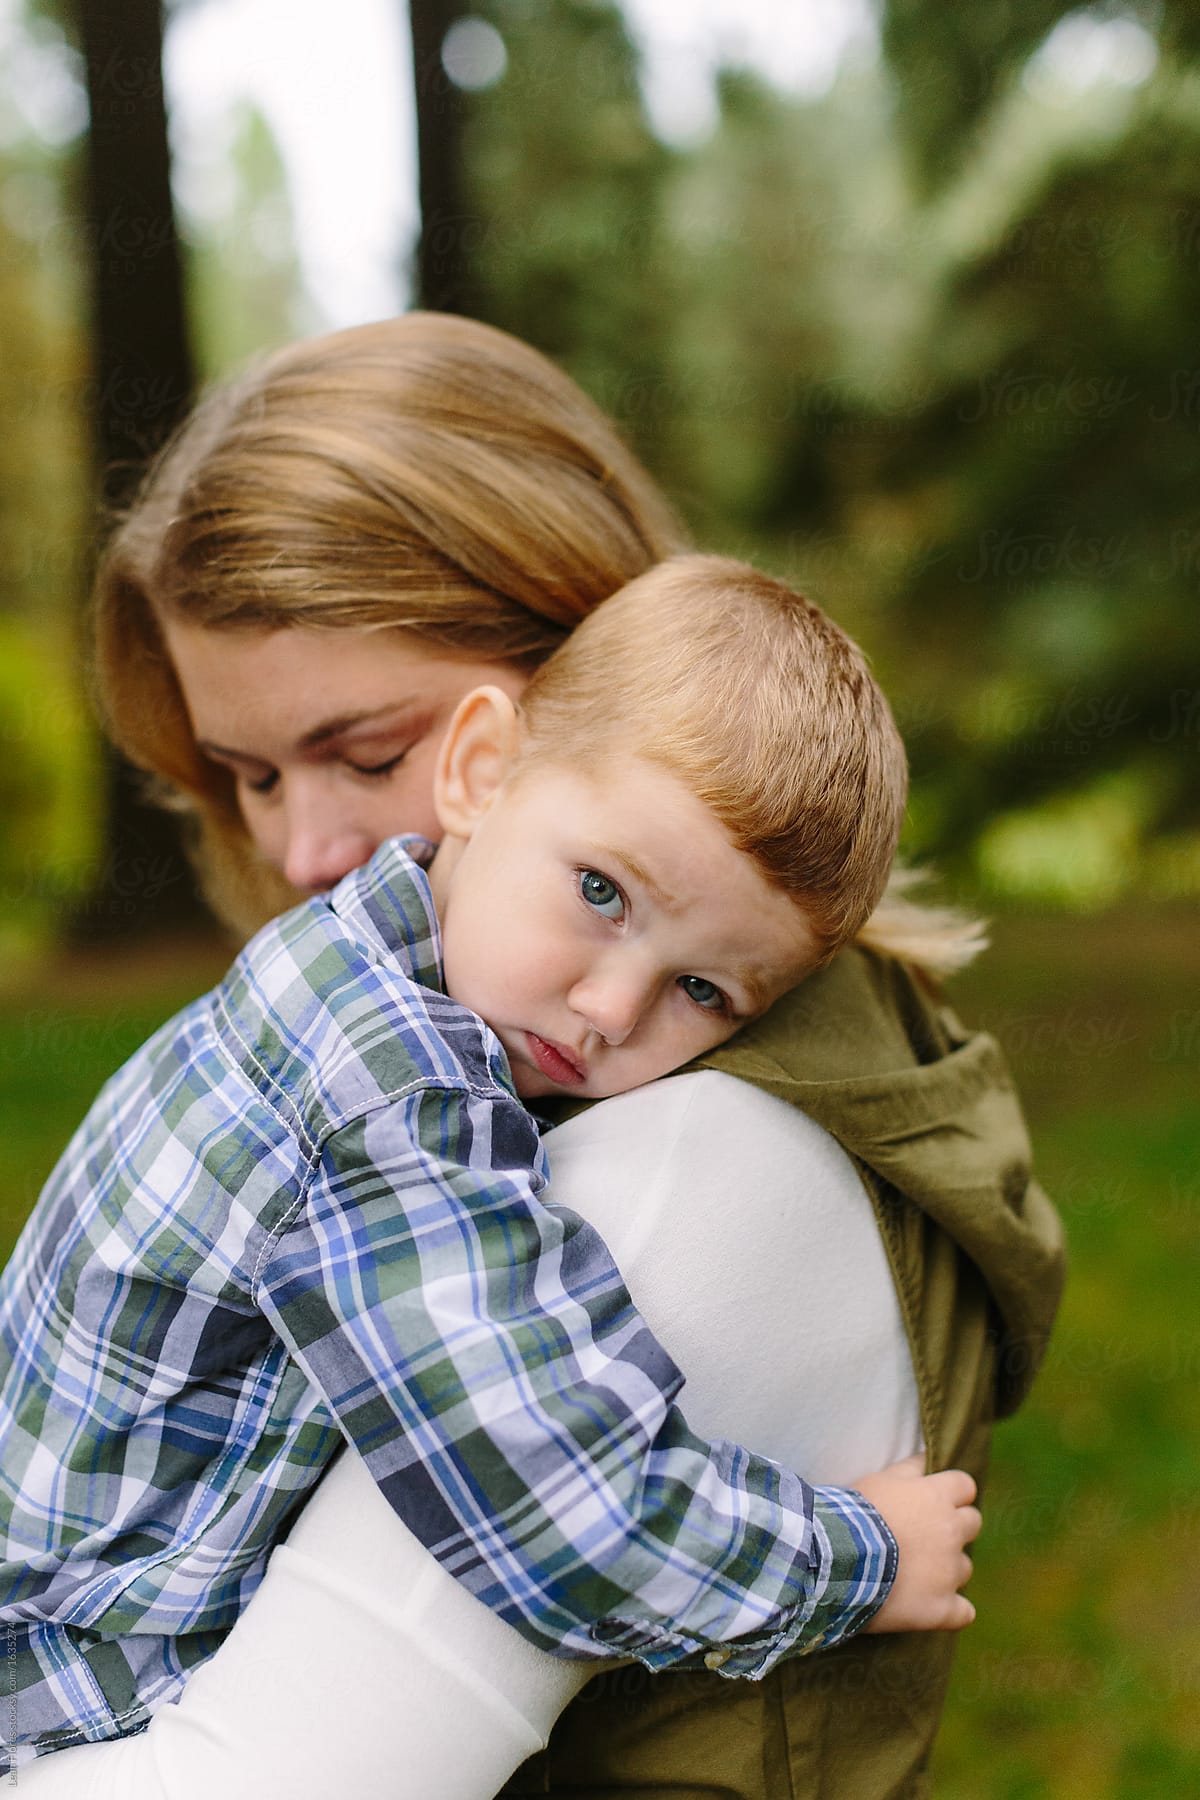 Little Boy Cuddling With Mom by Stocksy Contributor Leah Flores